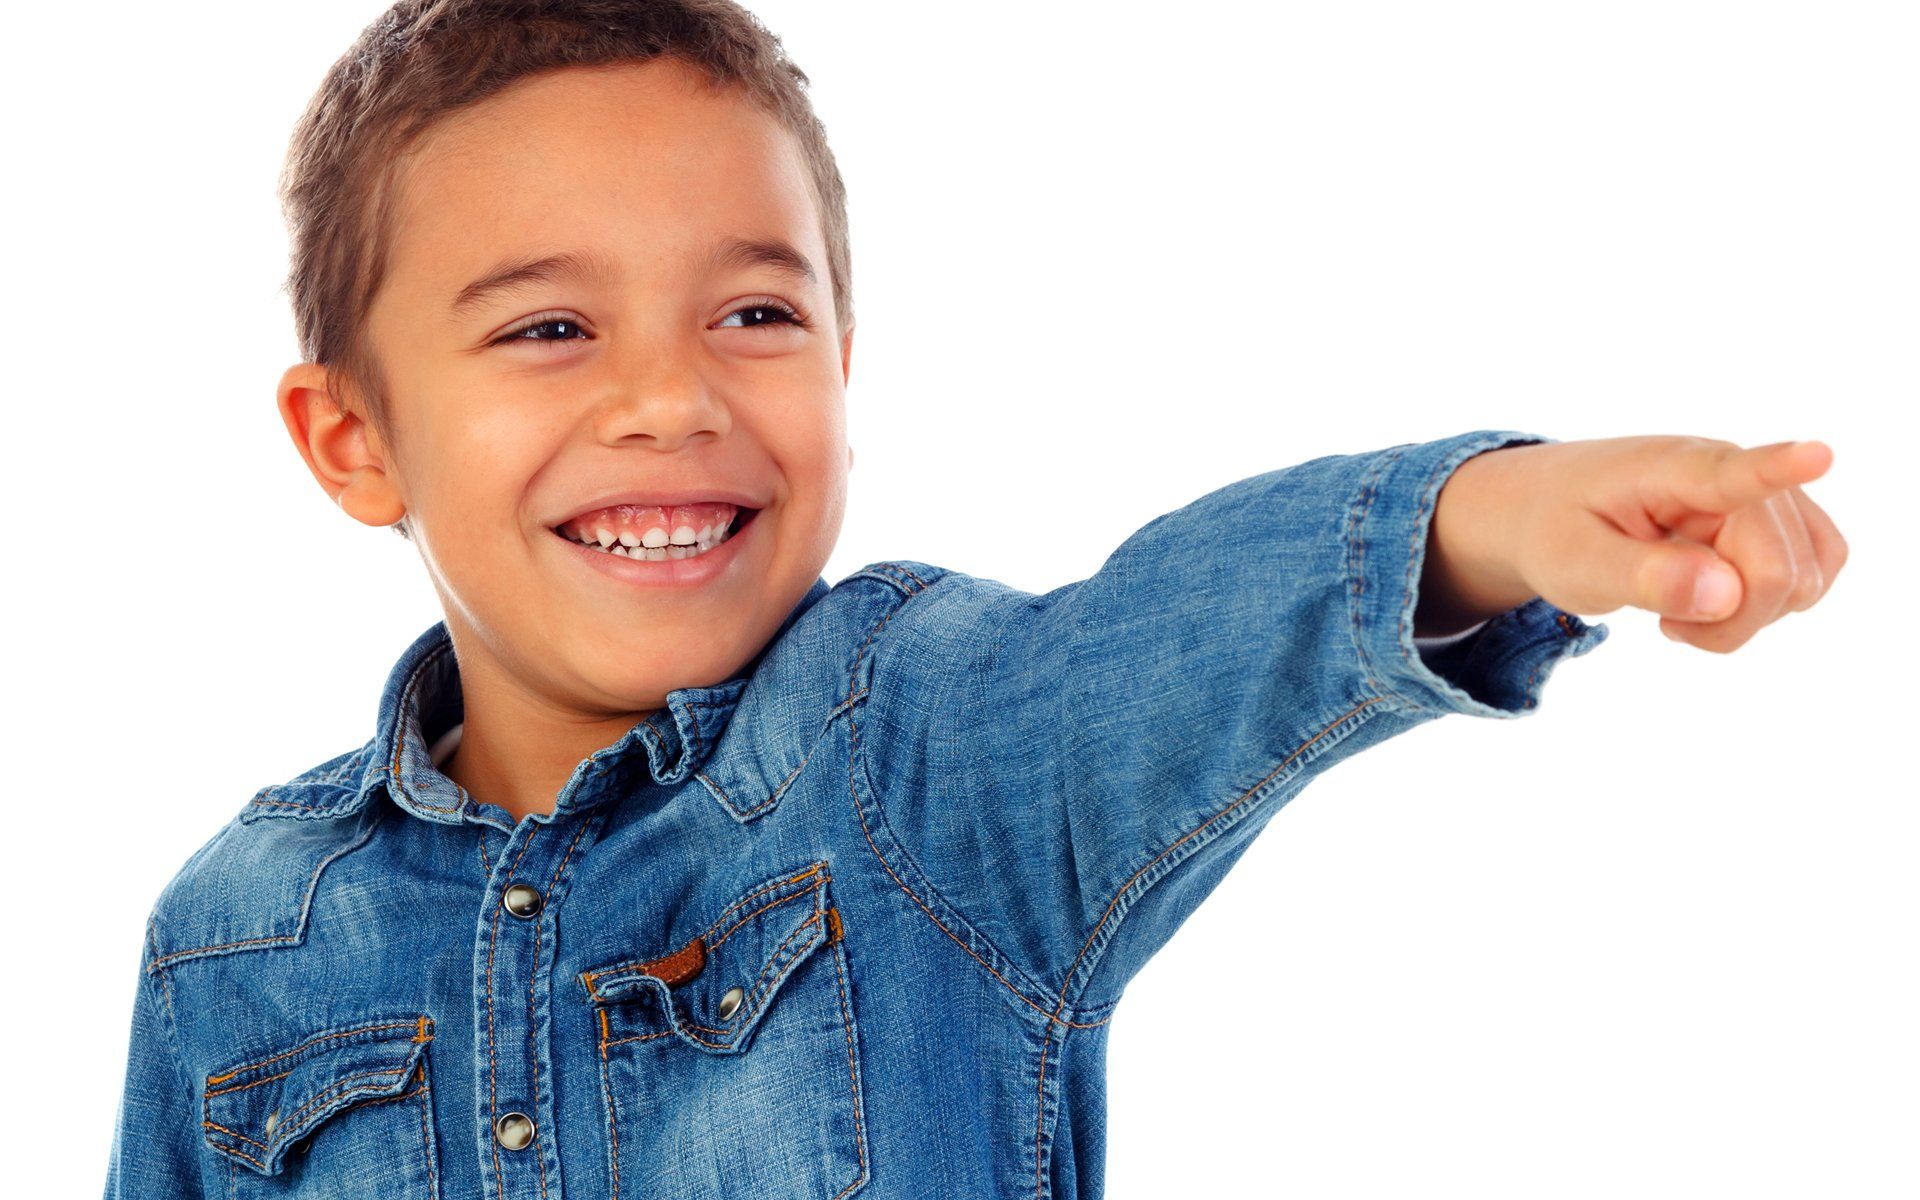 Young boy smiling and pointing